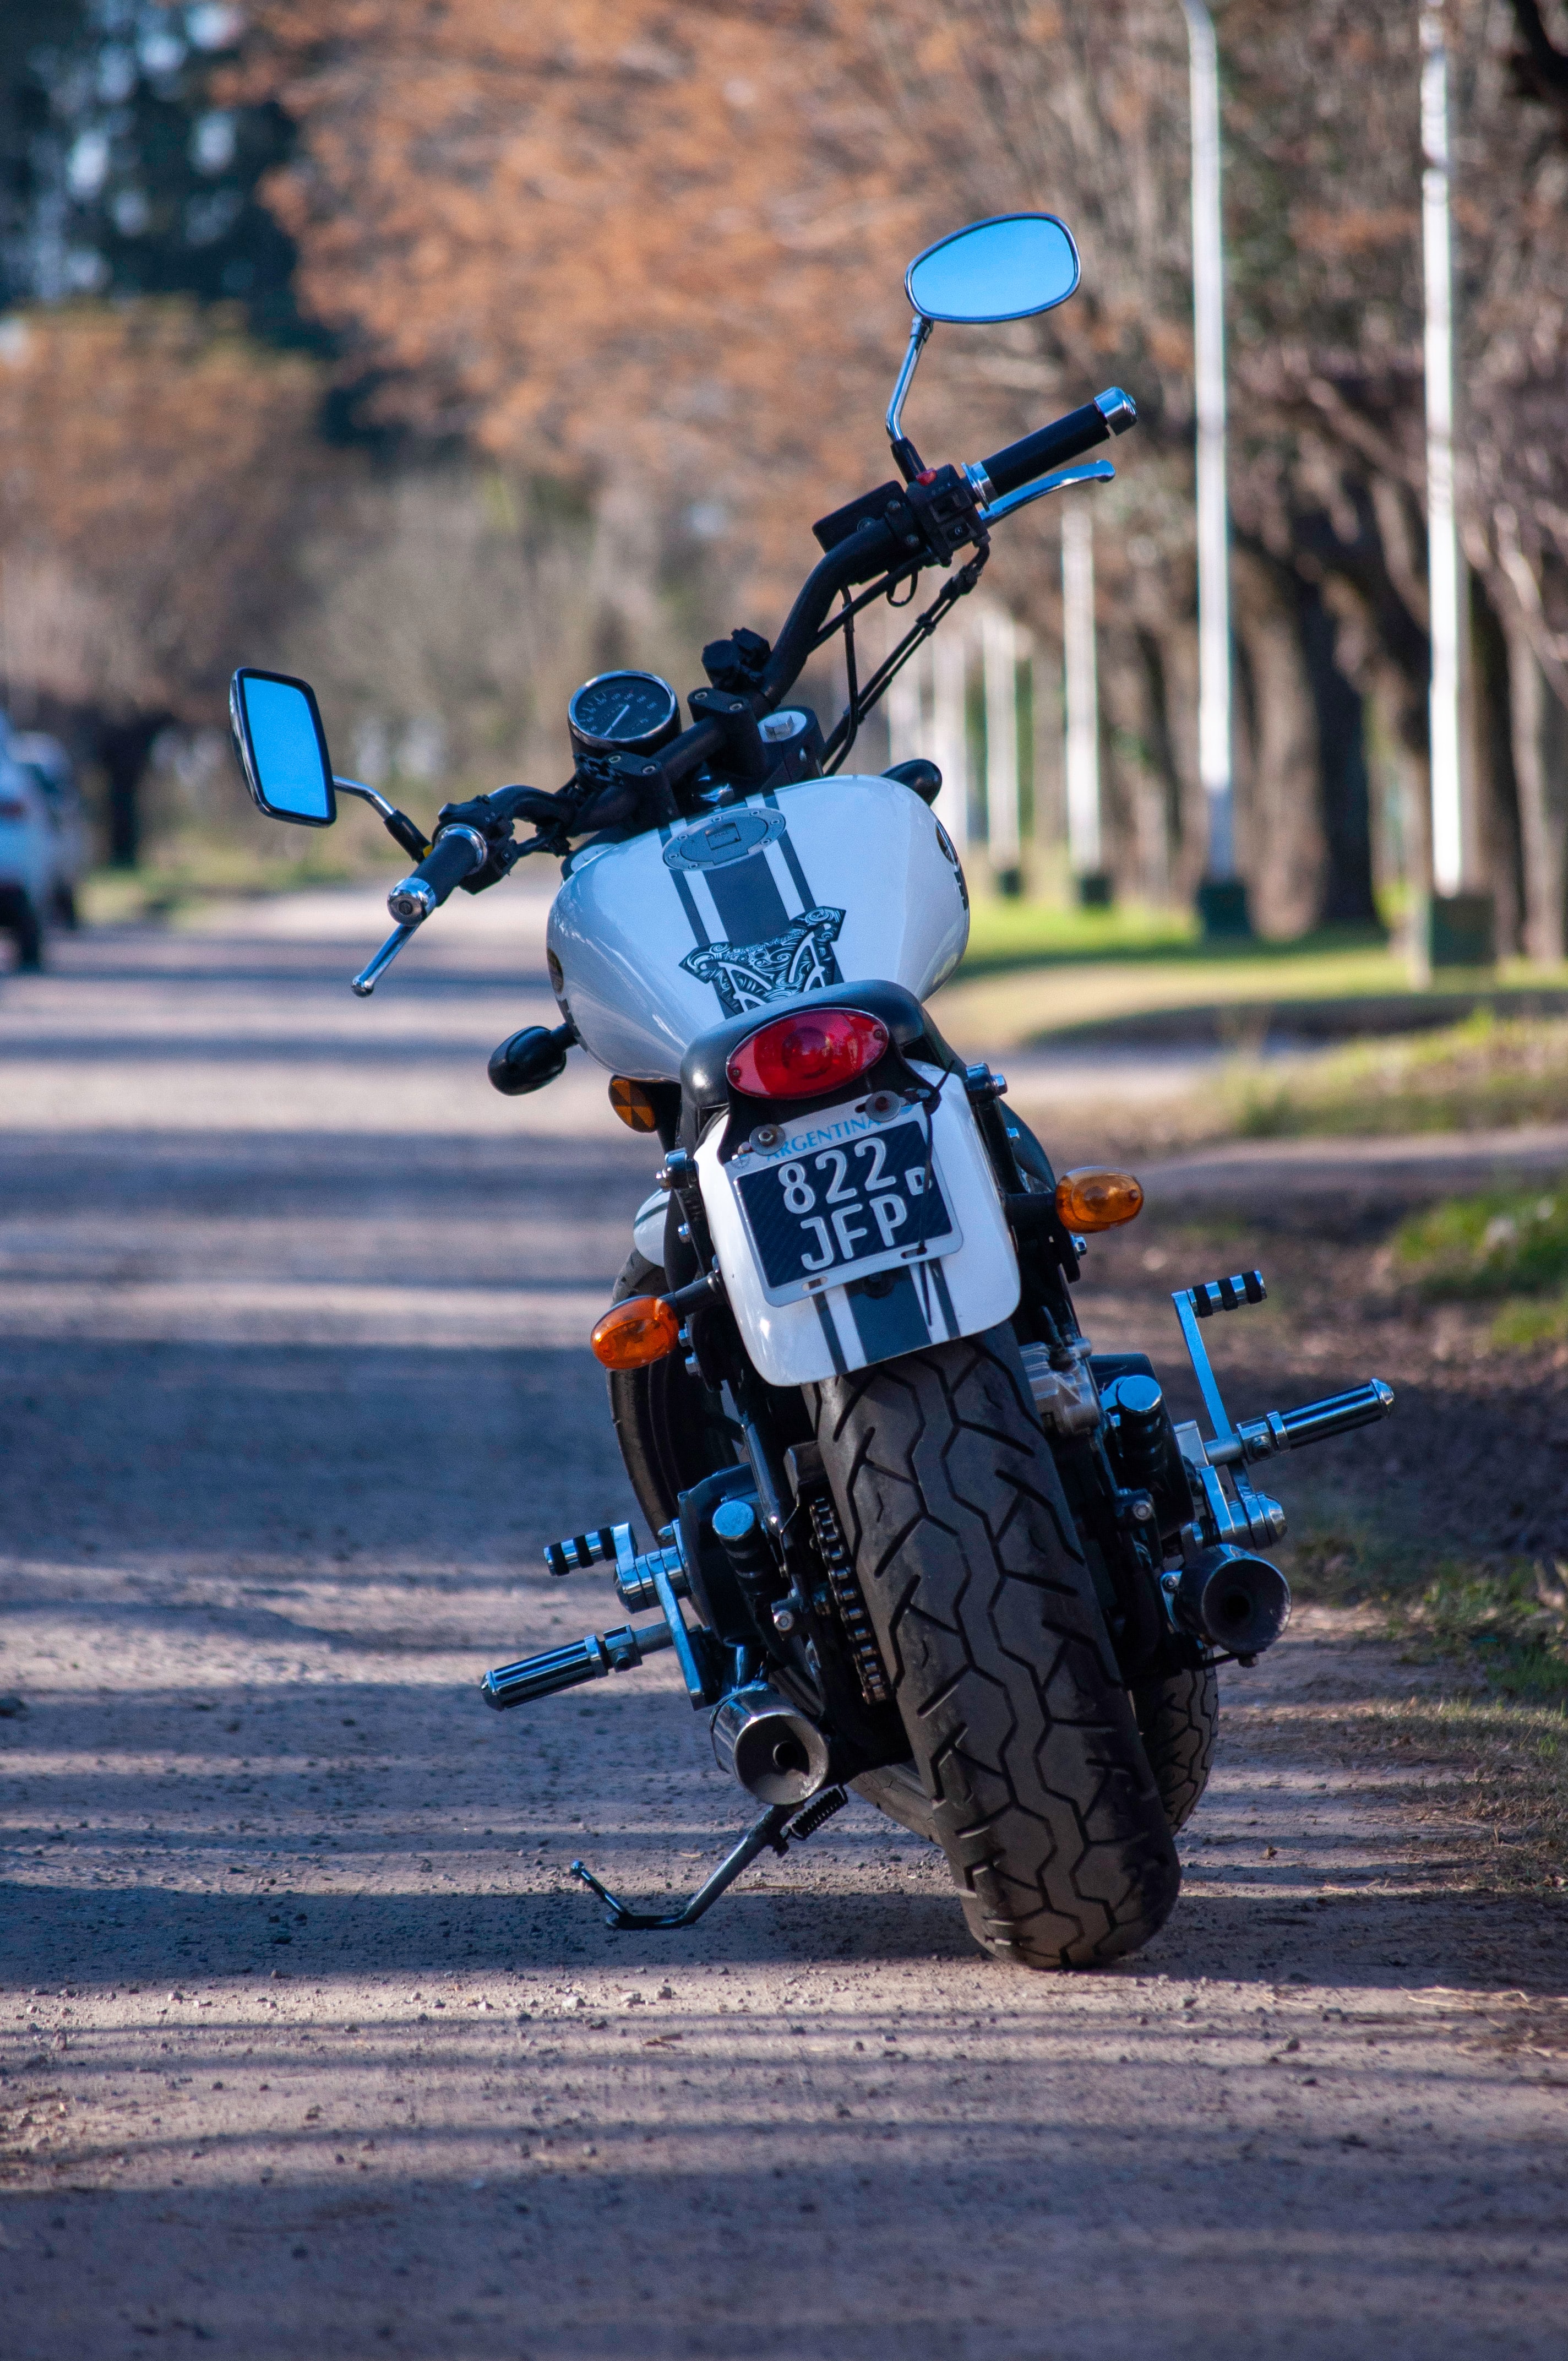 bike, motorcycle, back view, rear view, motorcycles